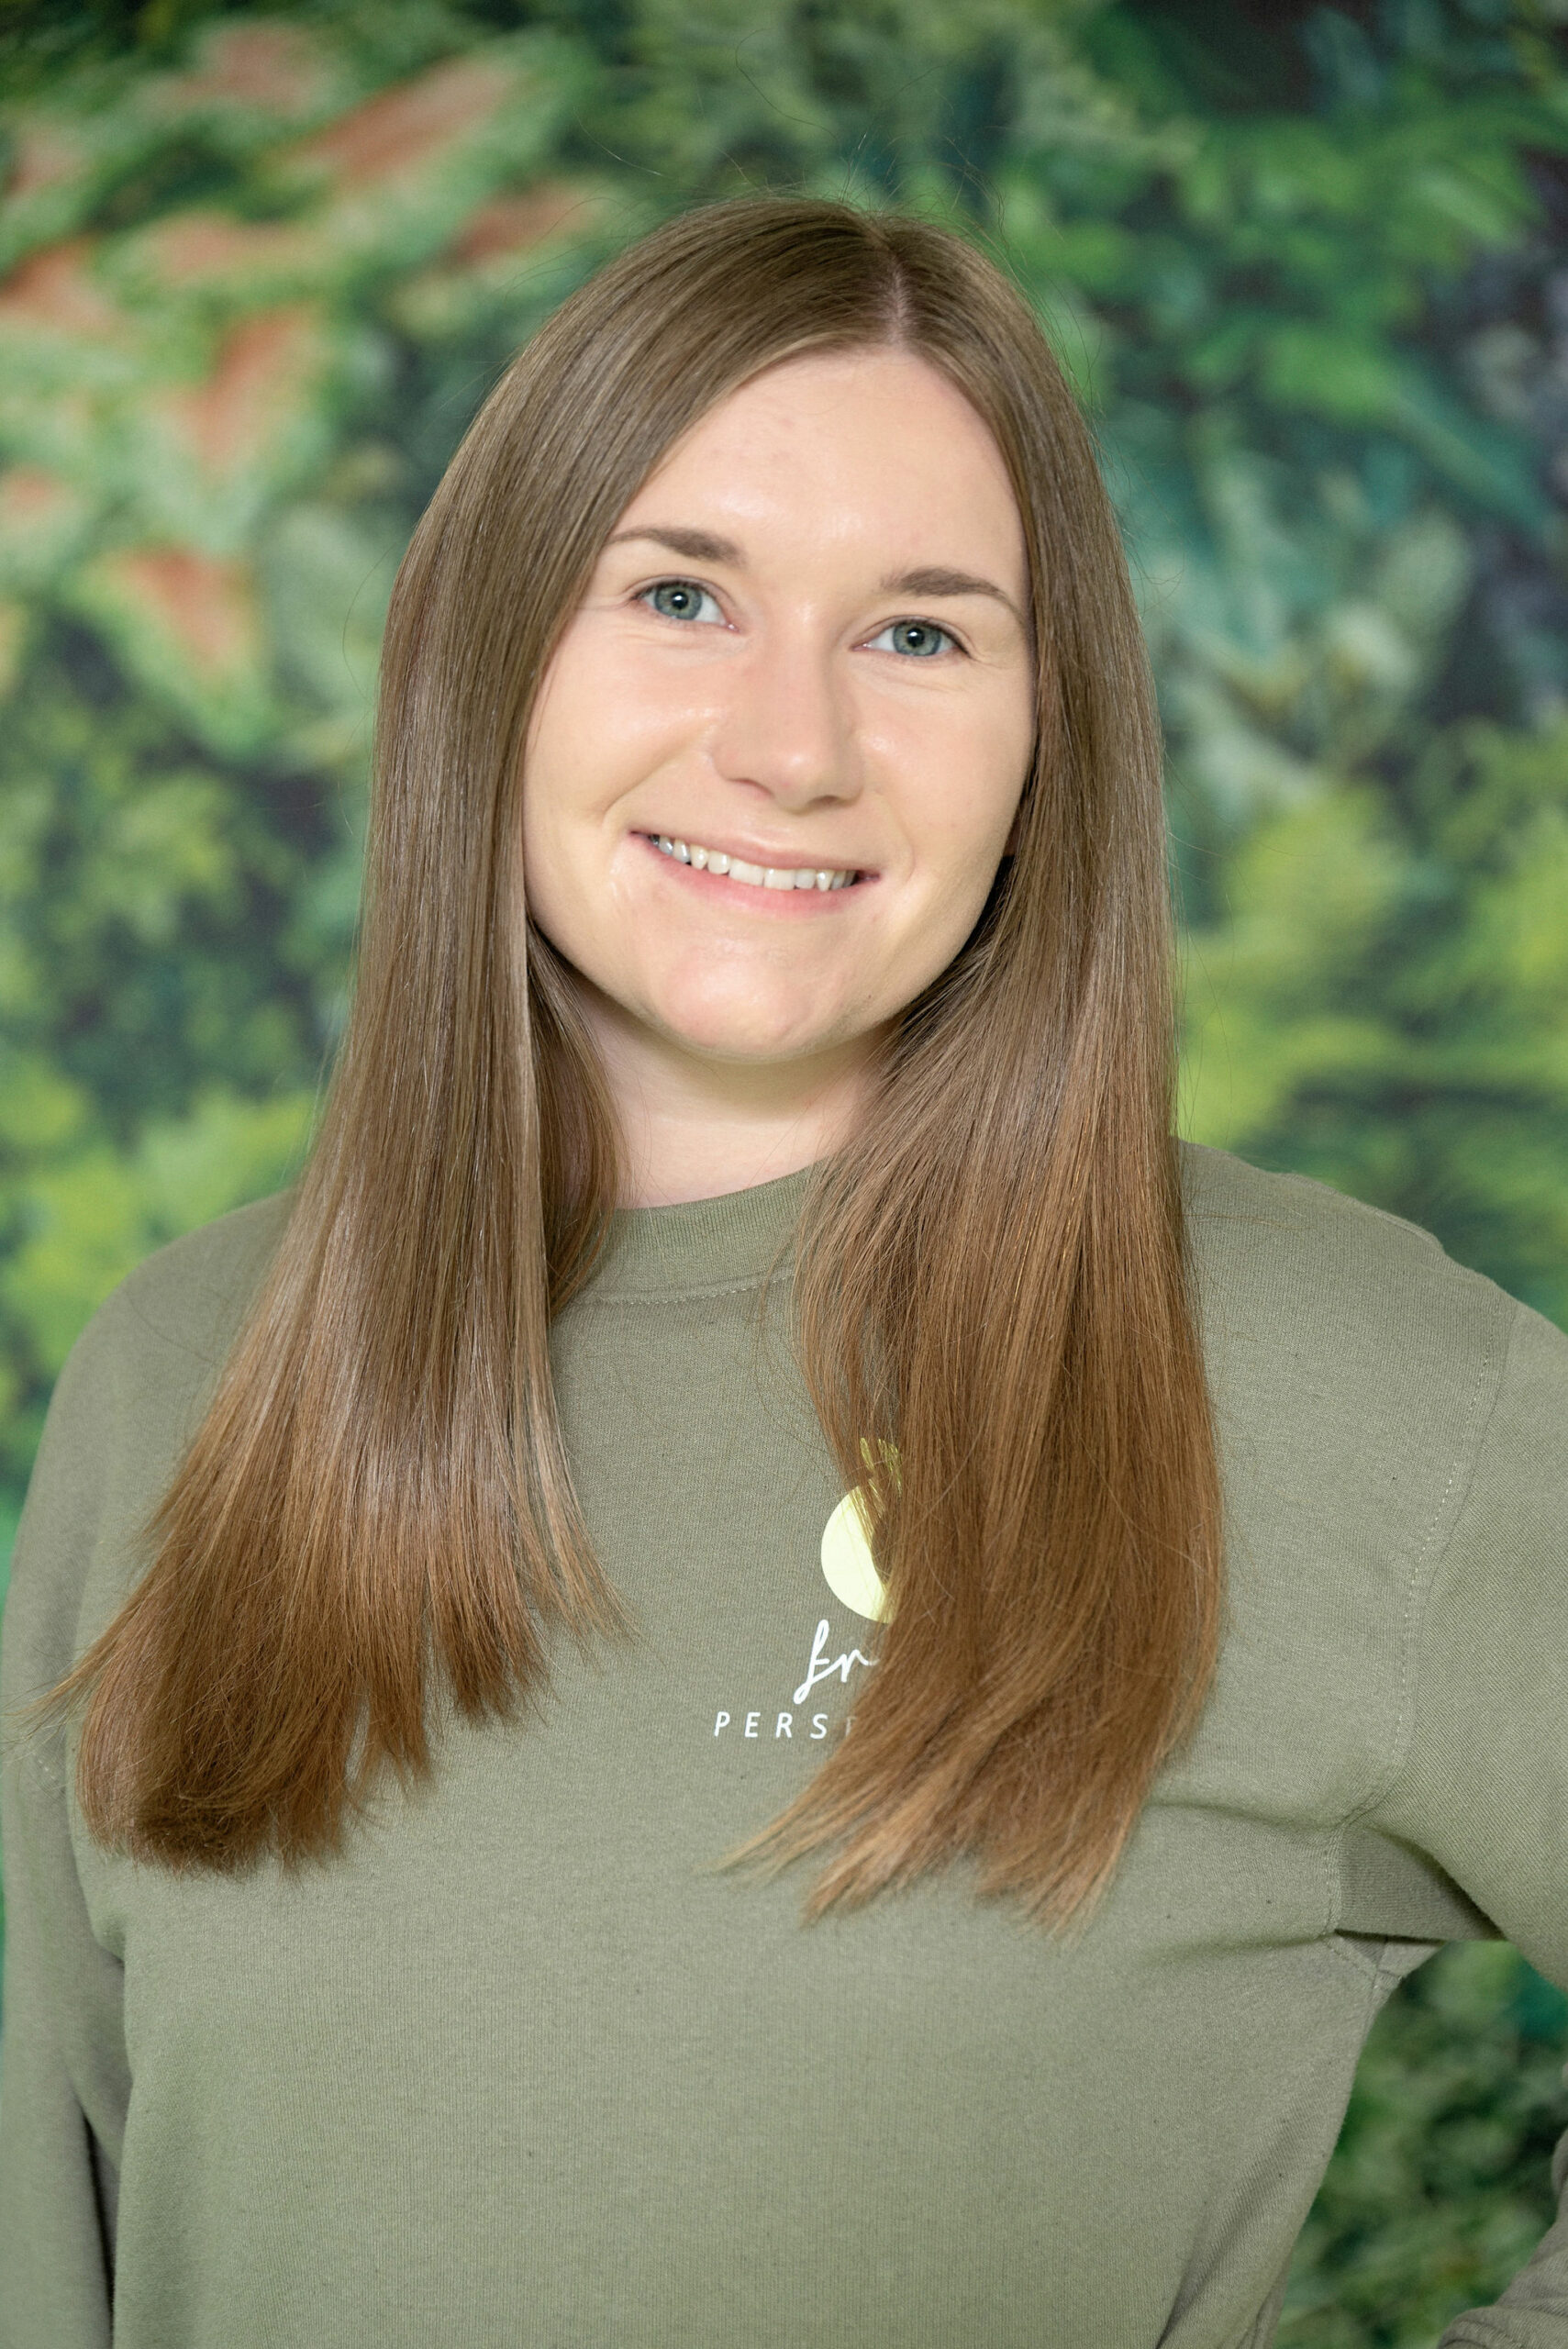 Meet The Team - Fresh Perspective Team Lead Andrea stood with a green jumper on in front of a leaf wallpaper